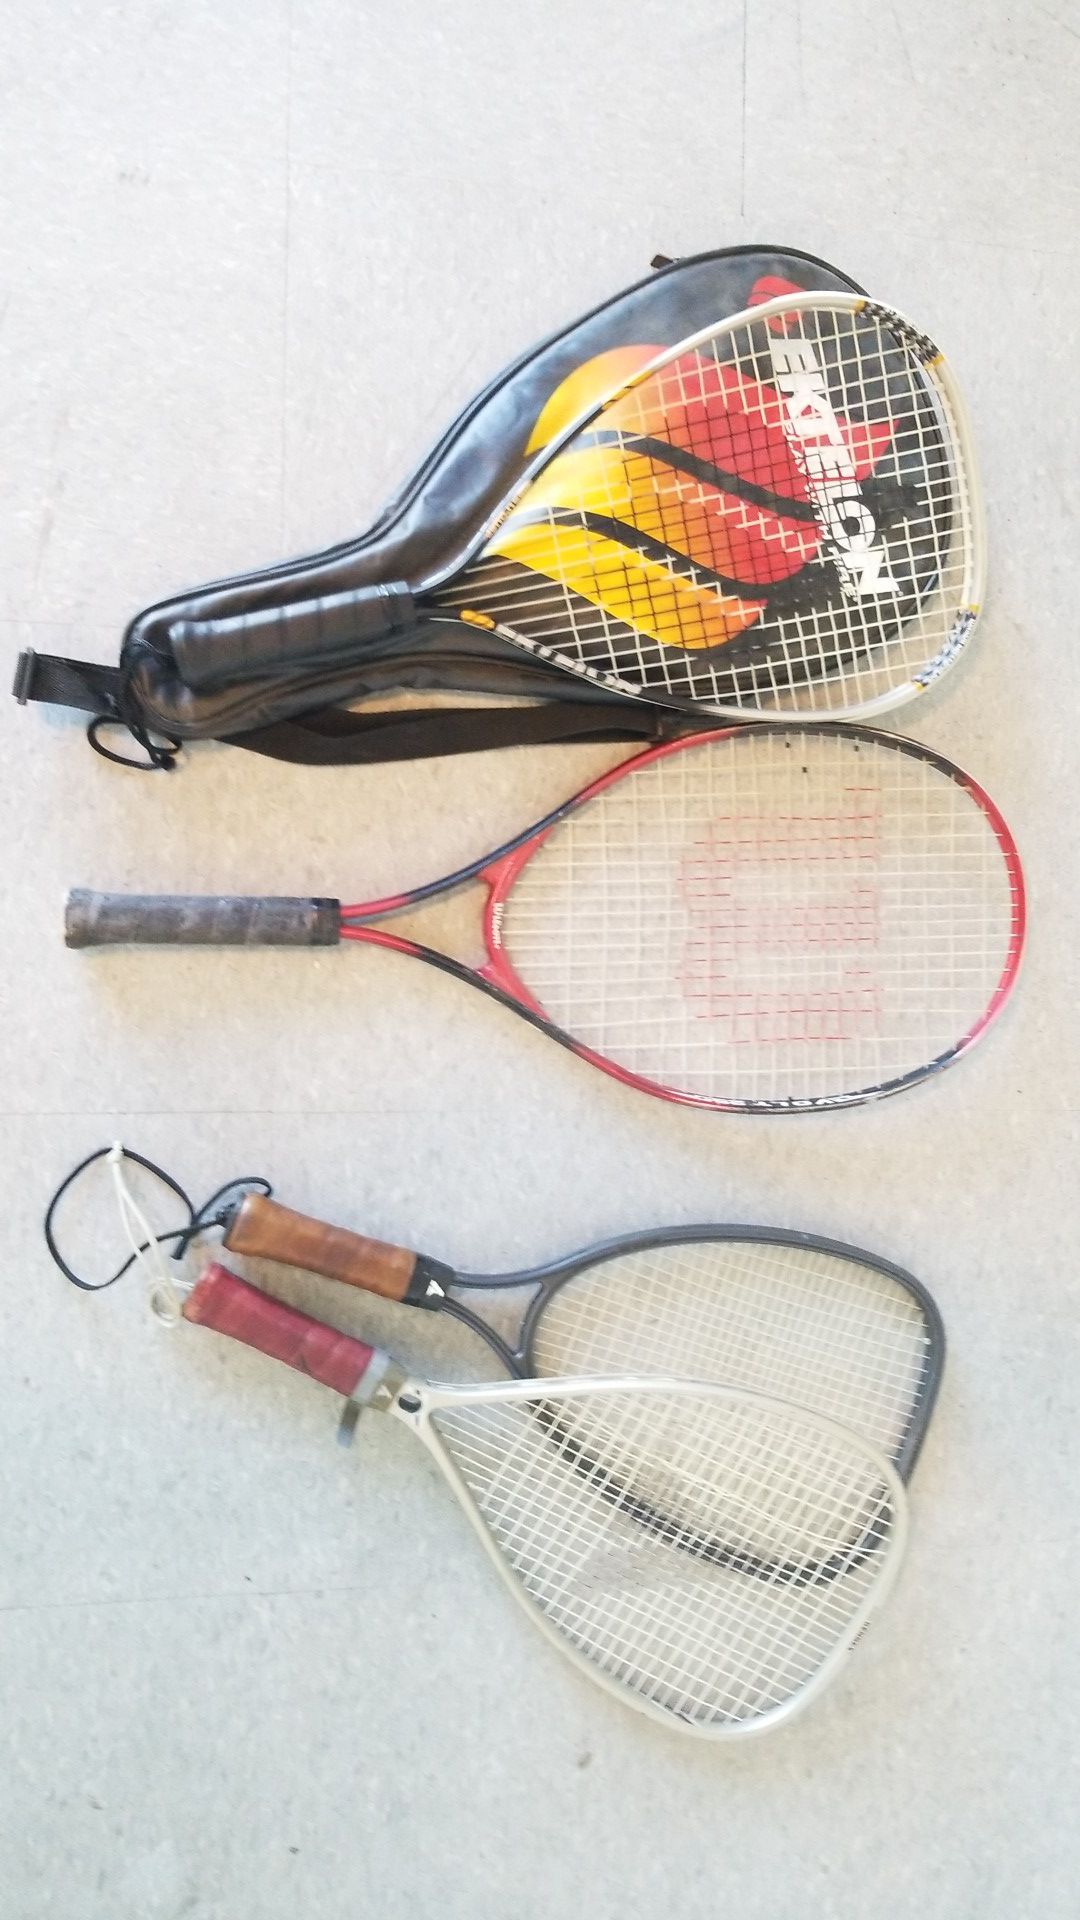 tennis rackets 4 for $20